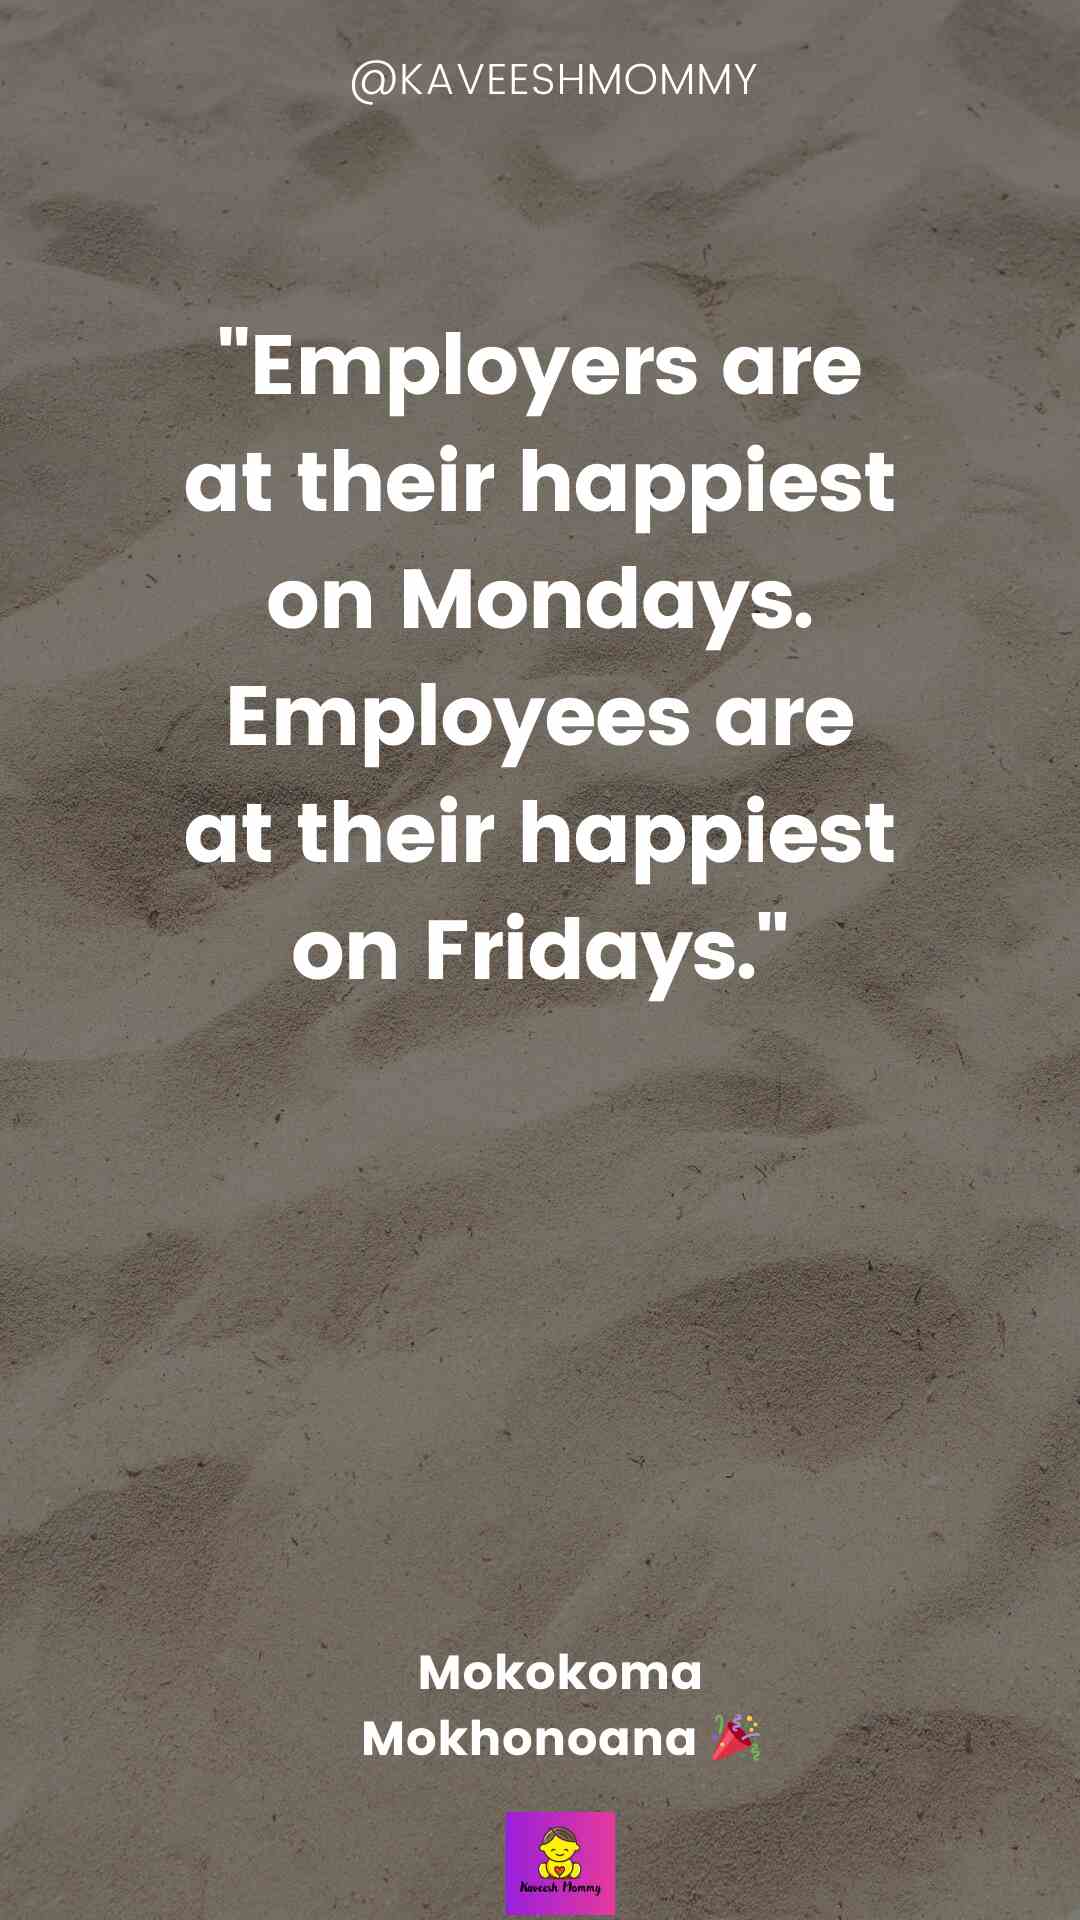 "Laugh Your Way into Monday with These Quotes"